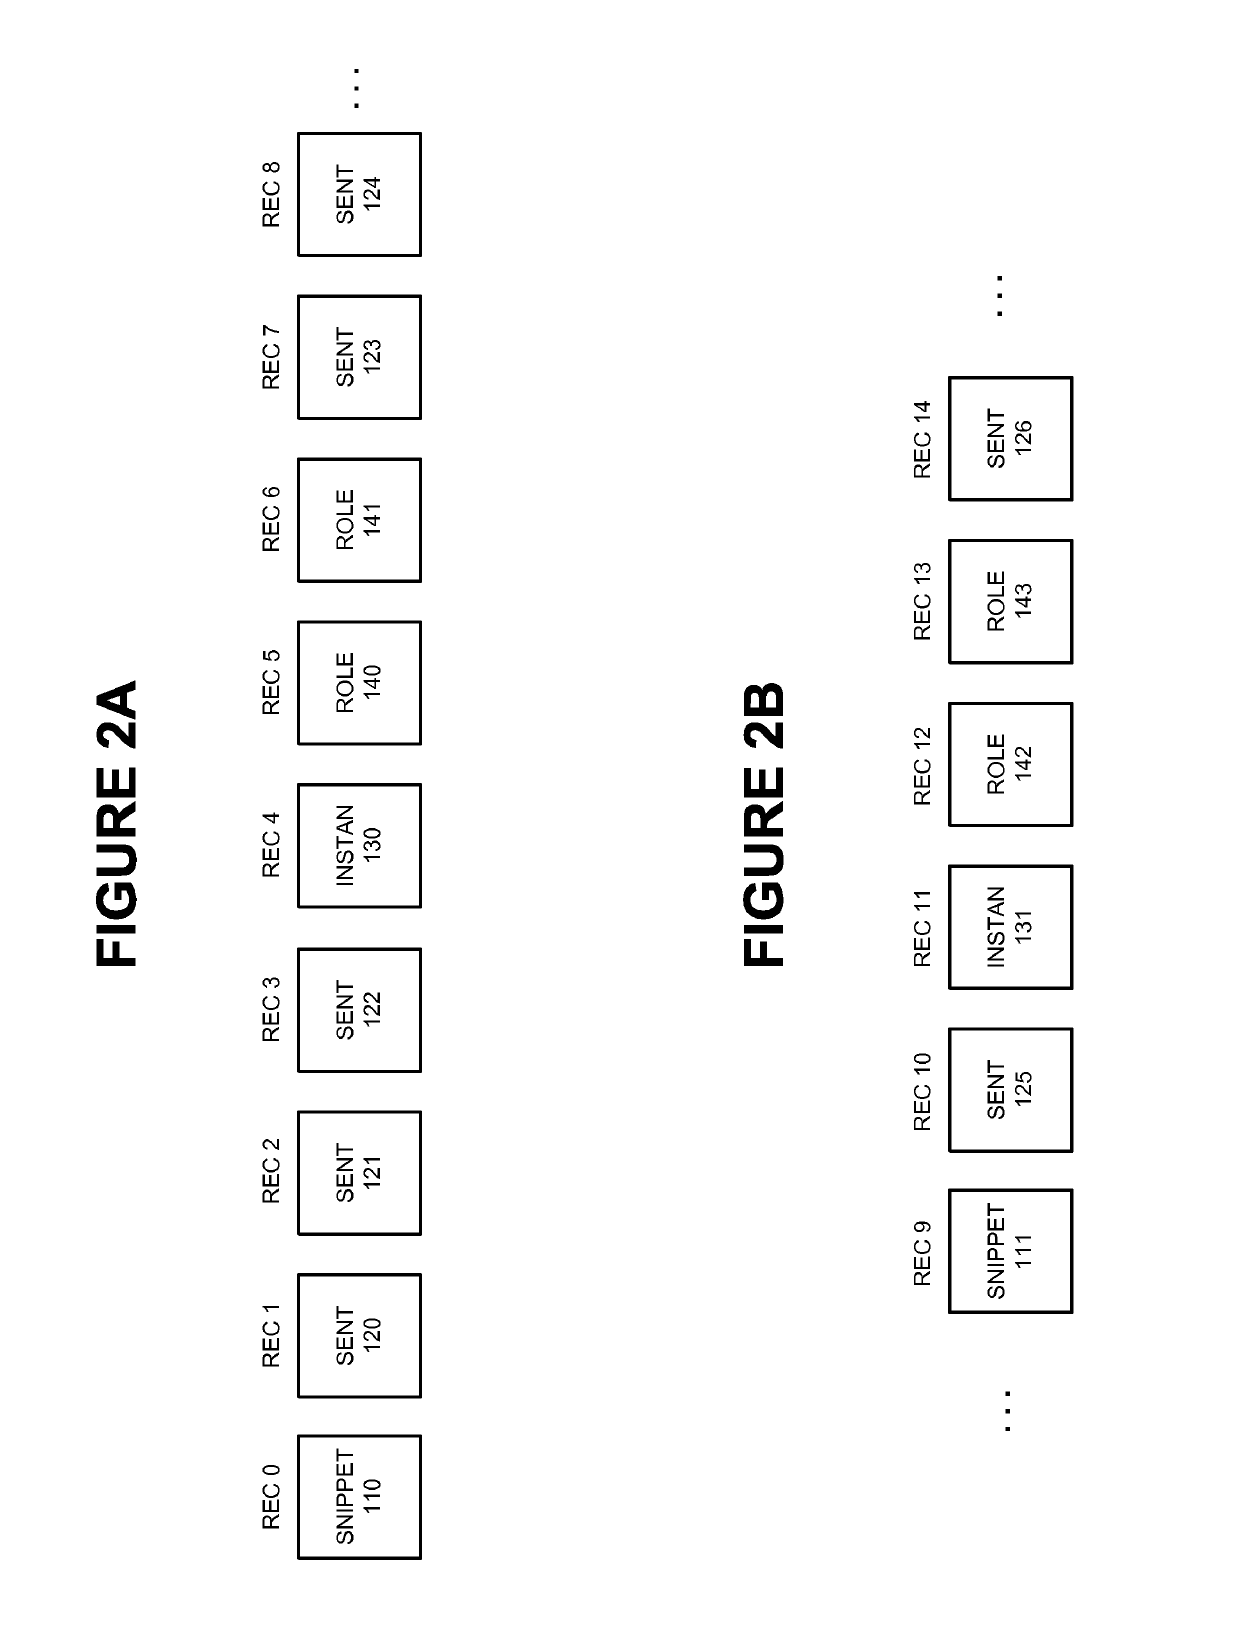 Method and apparatus for query formulation